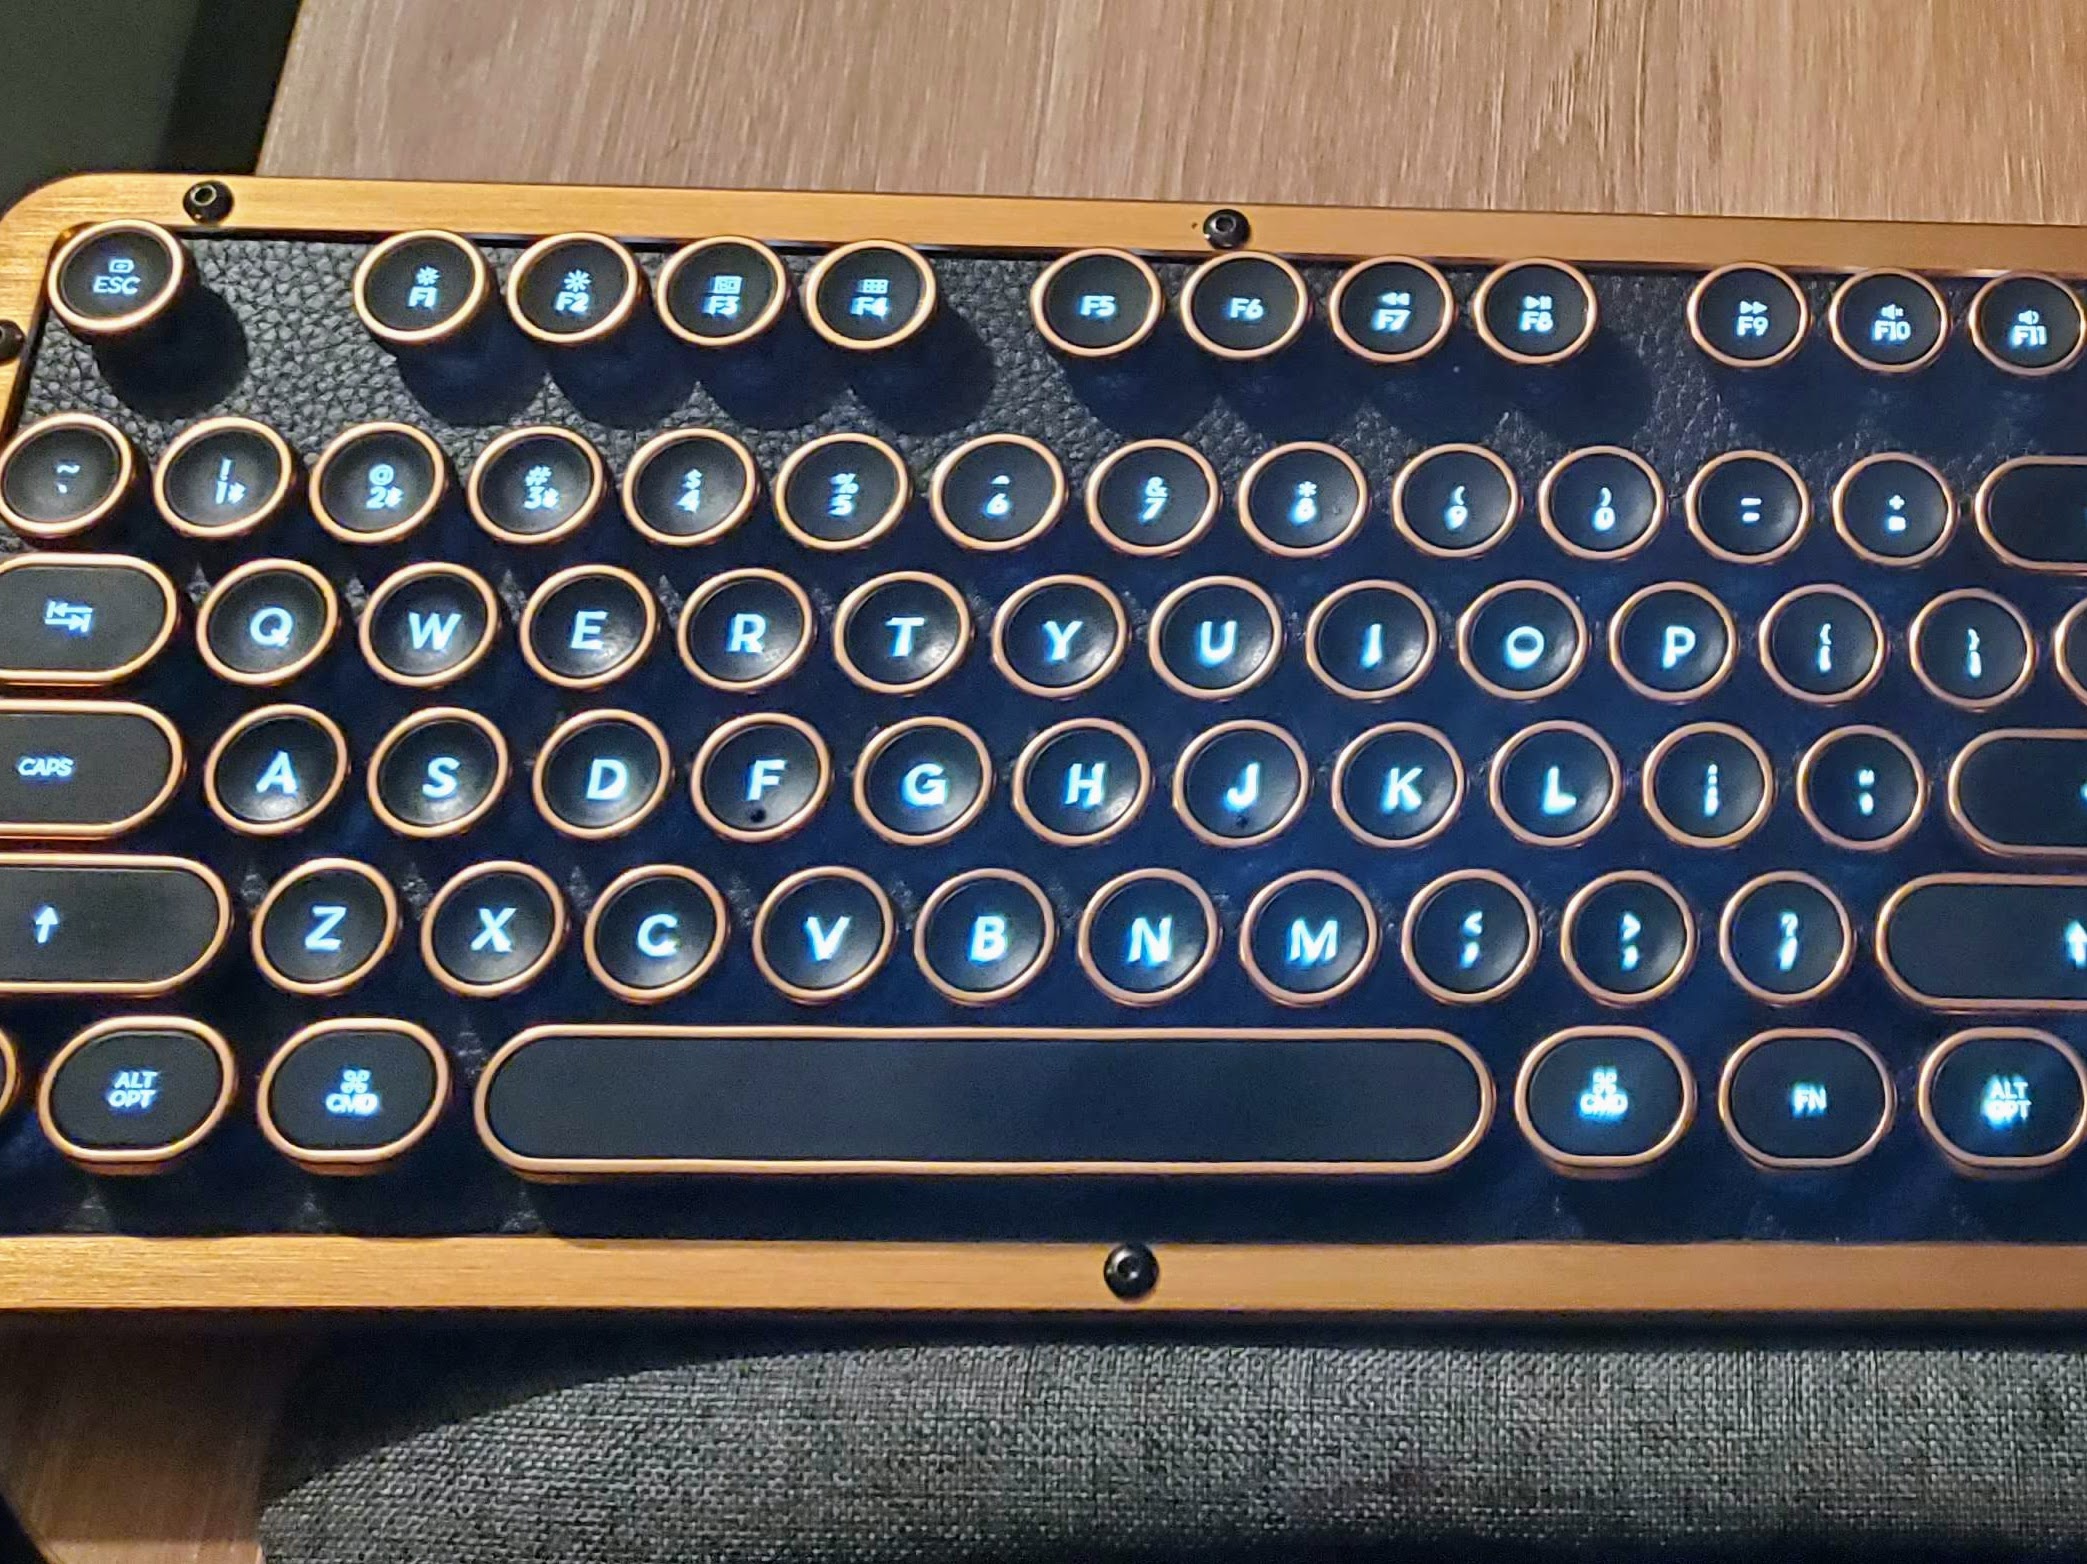 A keyboard with glowing keys, brass edging, and a leather back